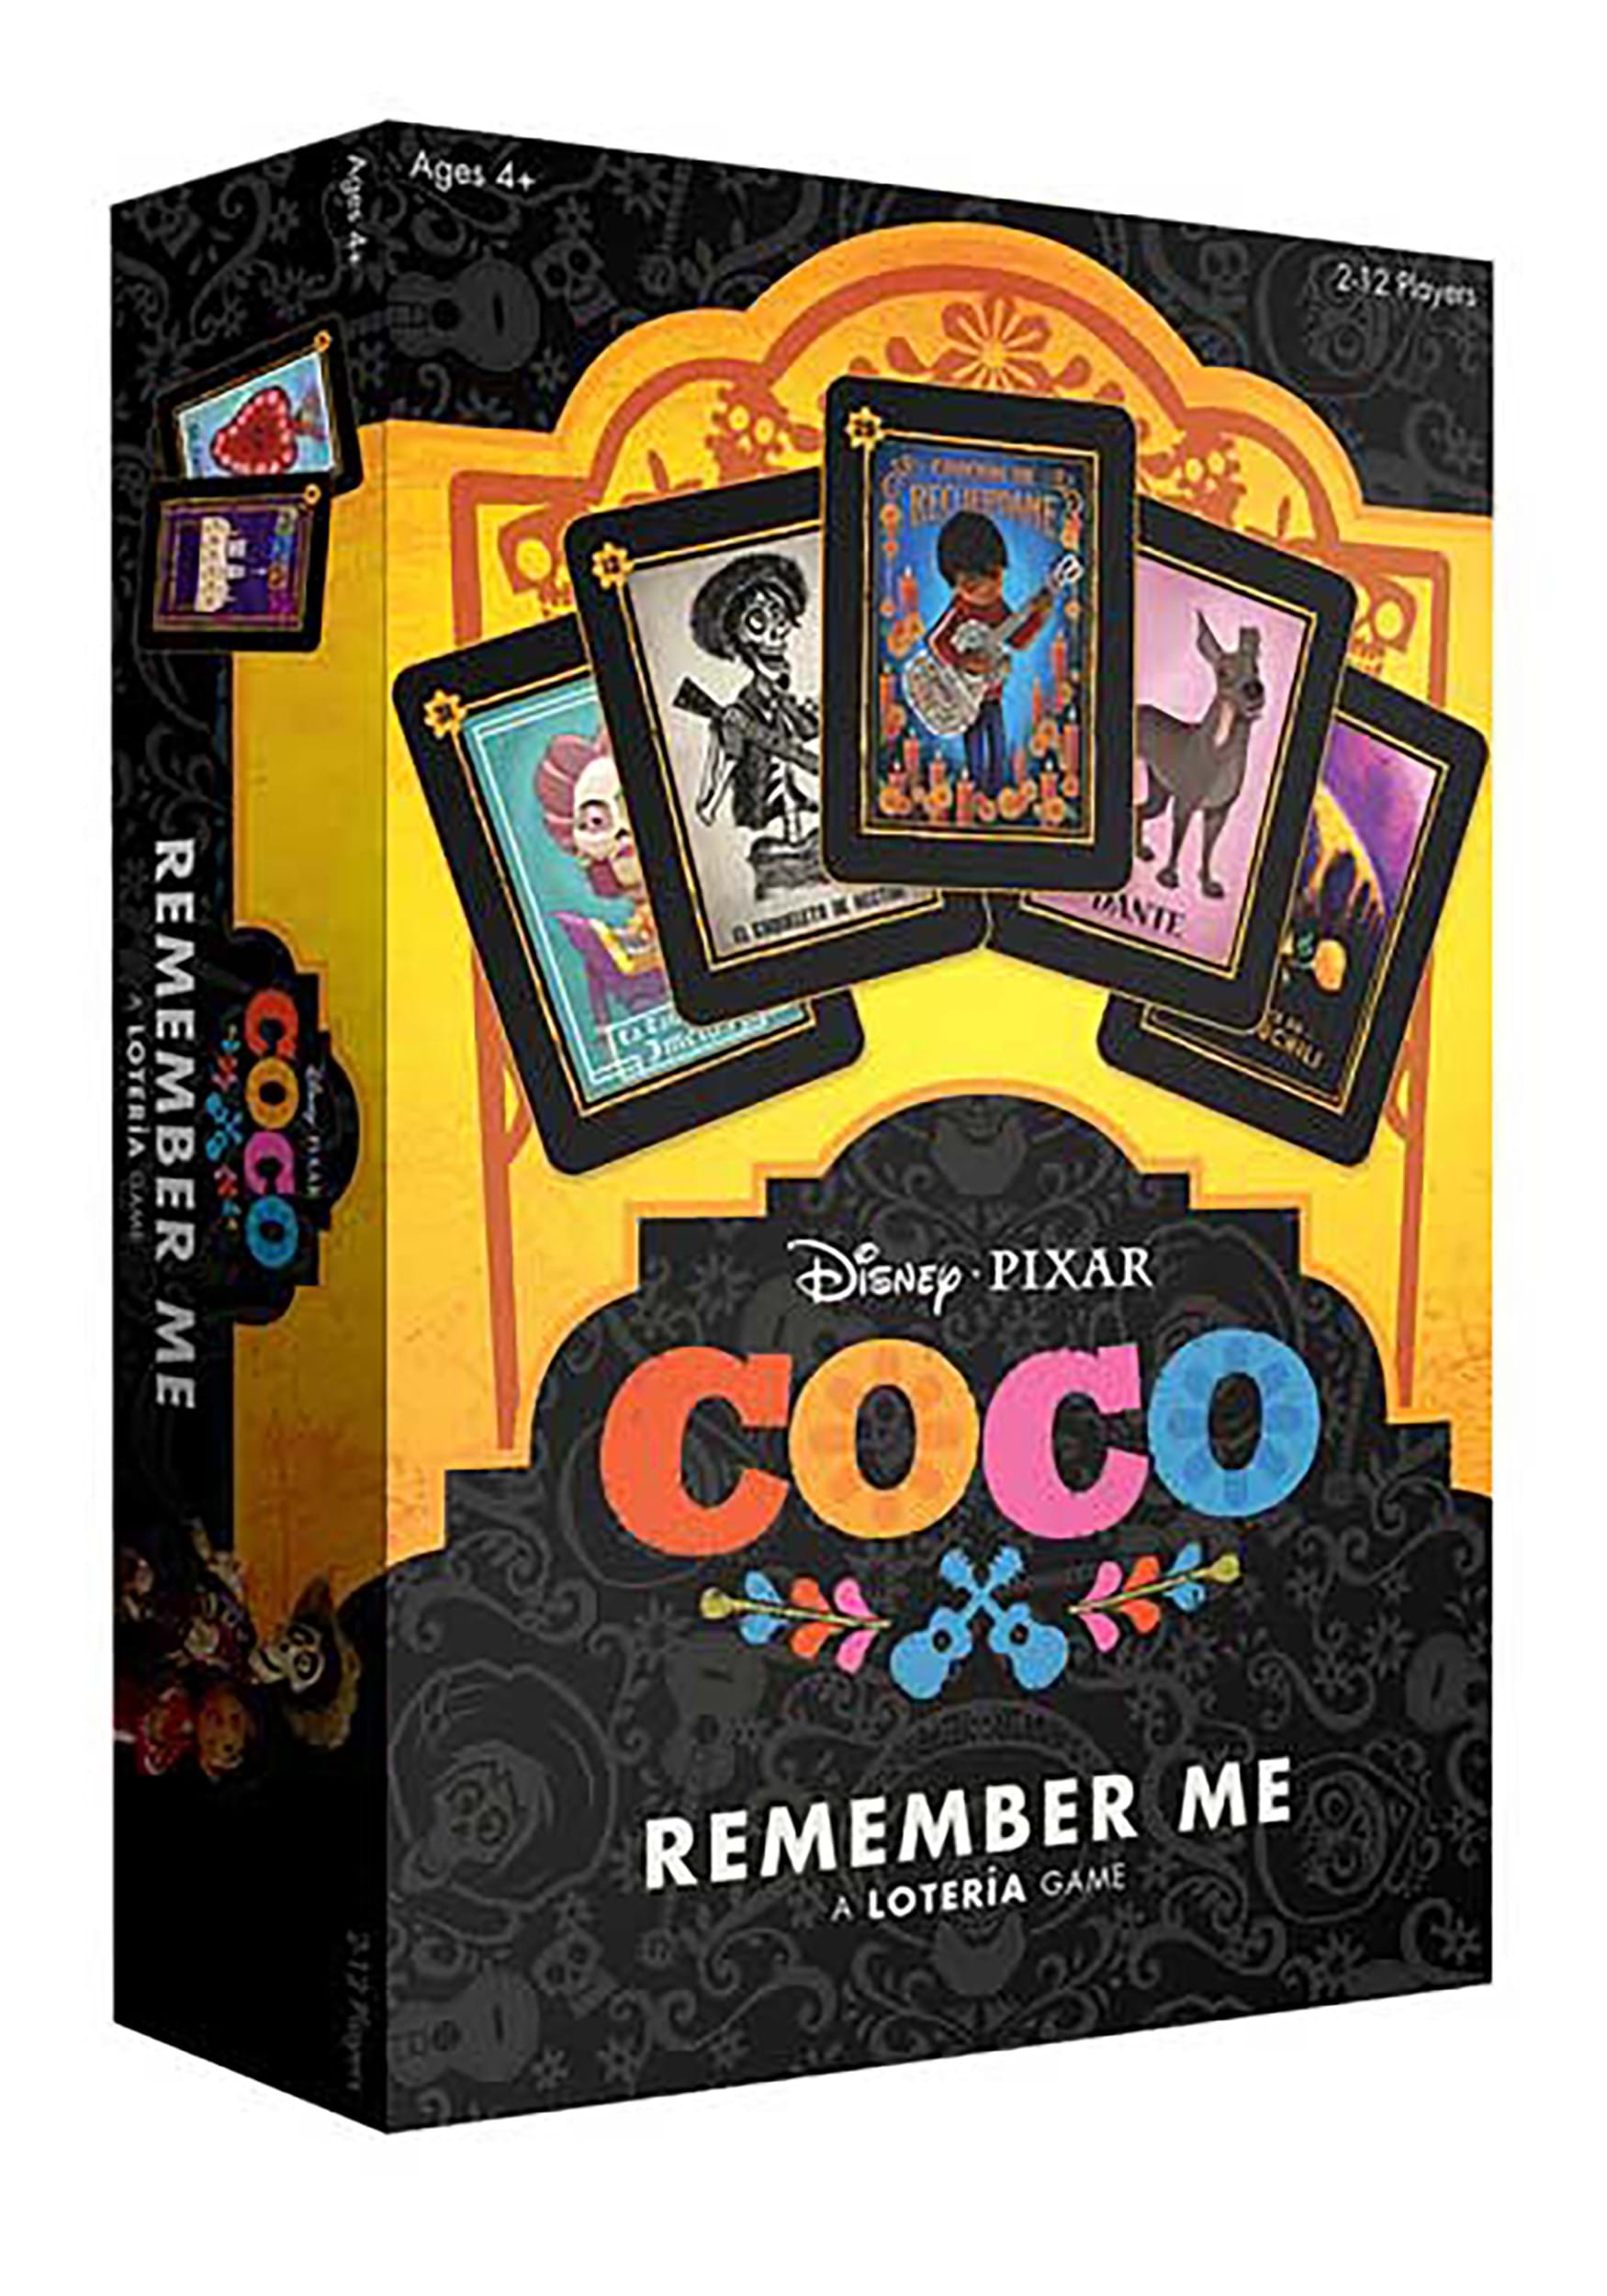 Coco: "Remember Me" A Lotería Game (English/Spanish Rules)